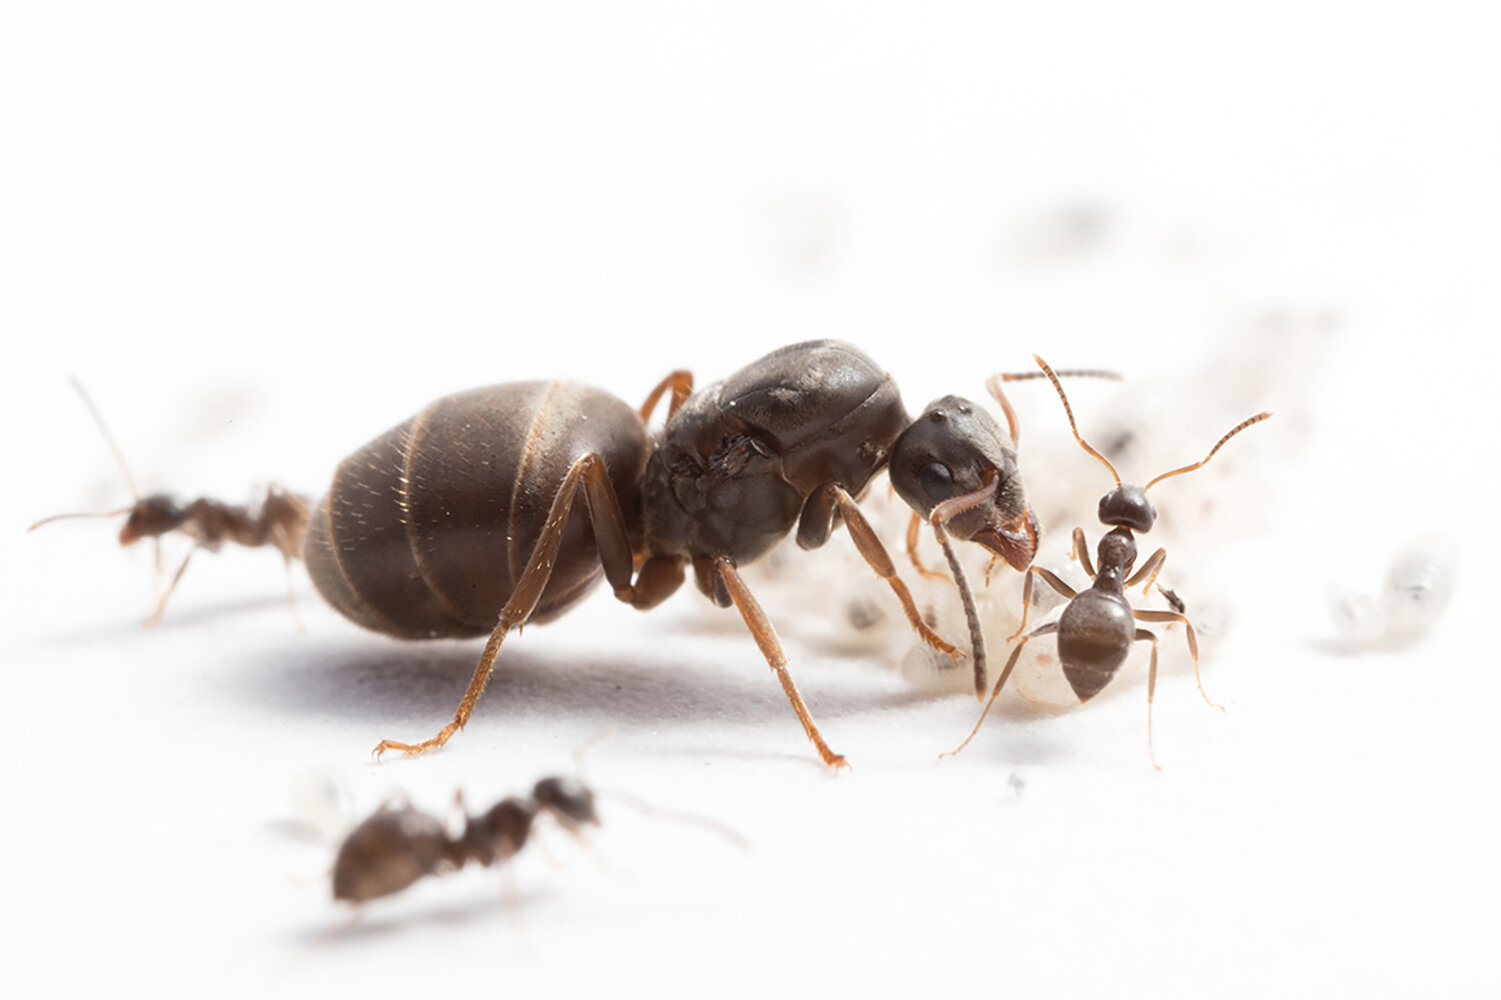 More diverse ant colonies raise more offspring